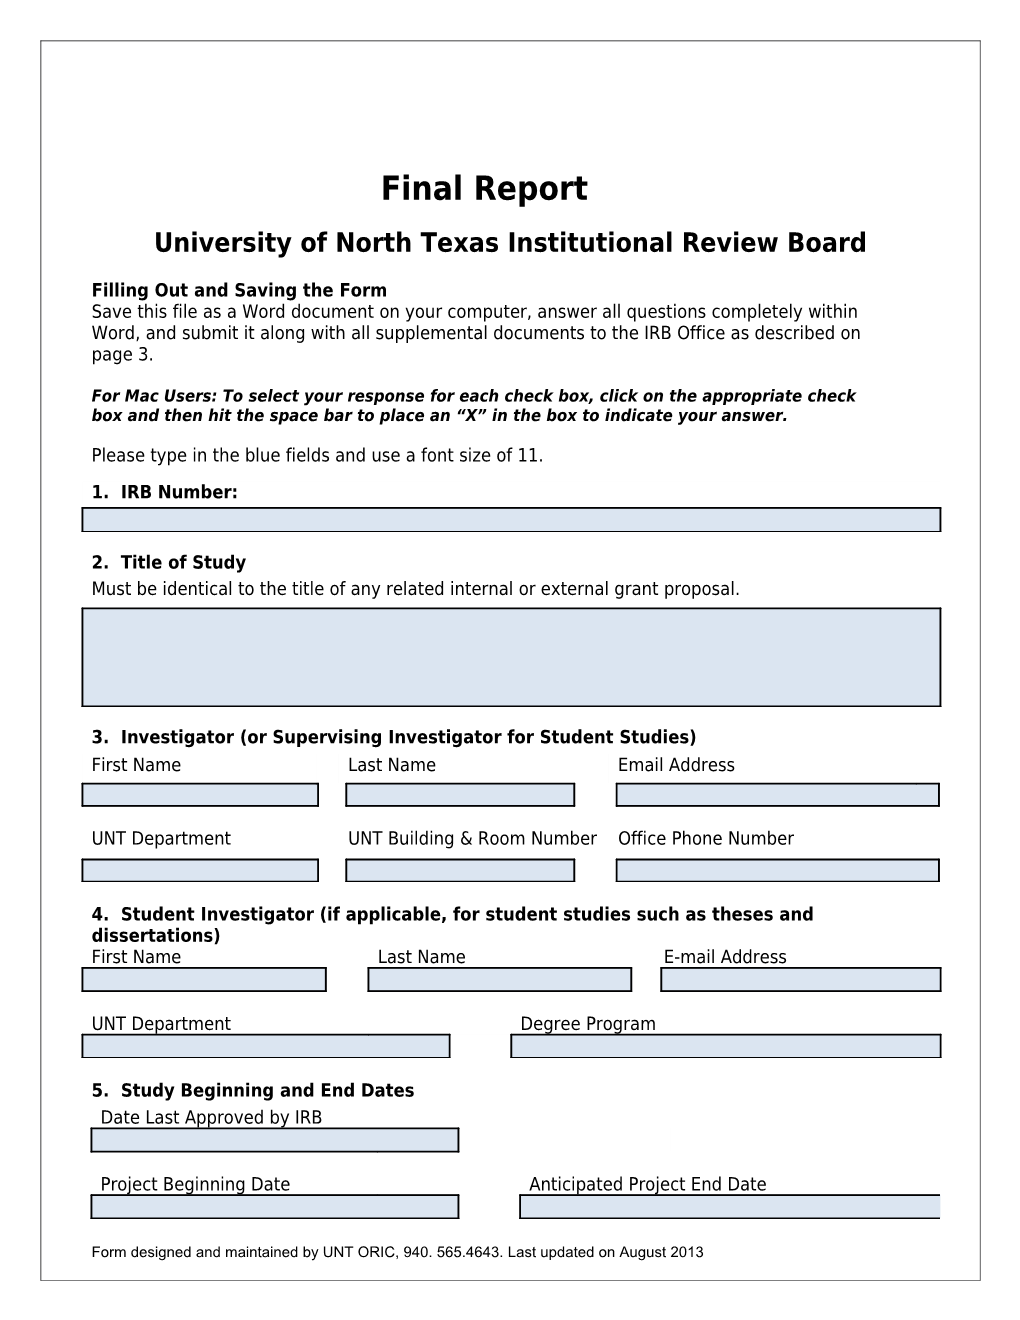 University of North Texas Institutional Review Board